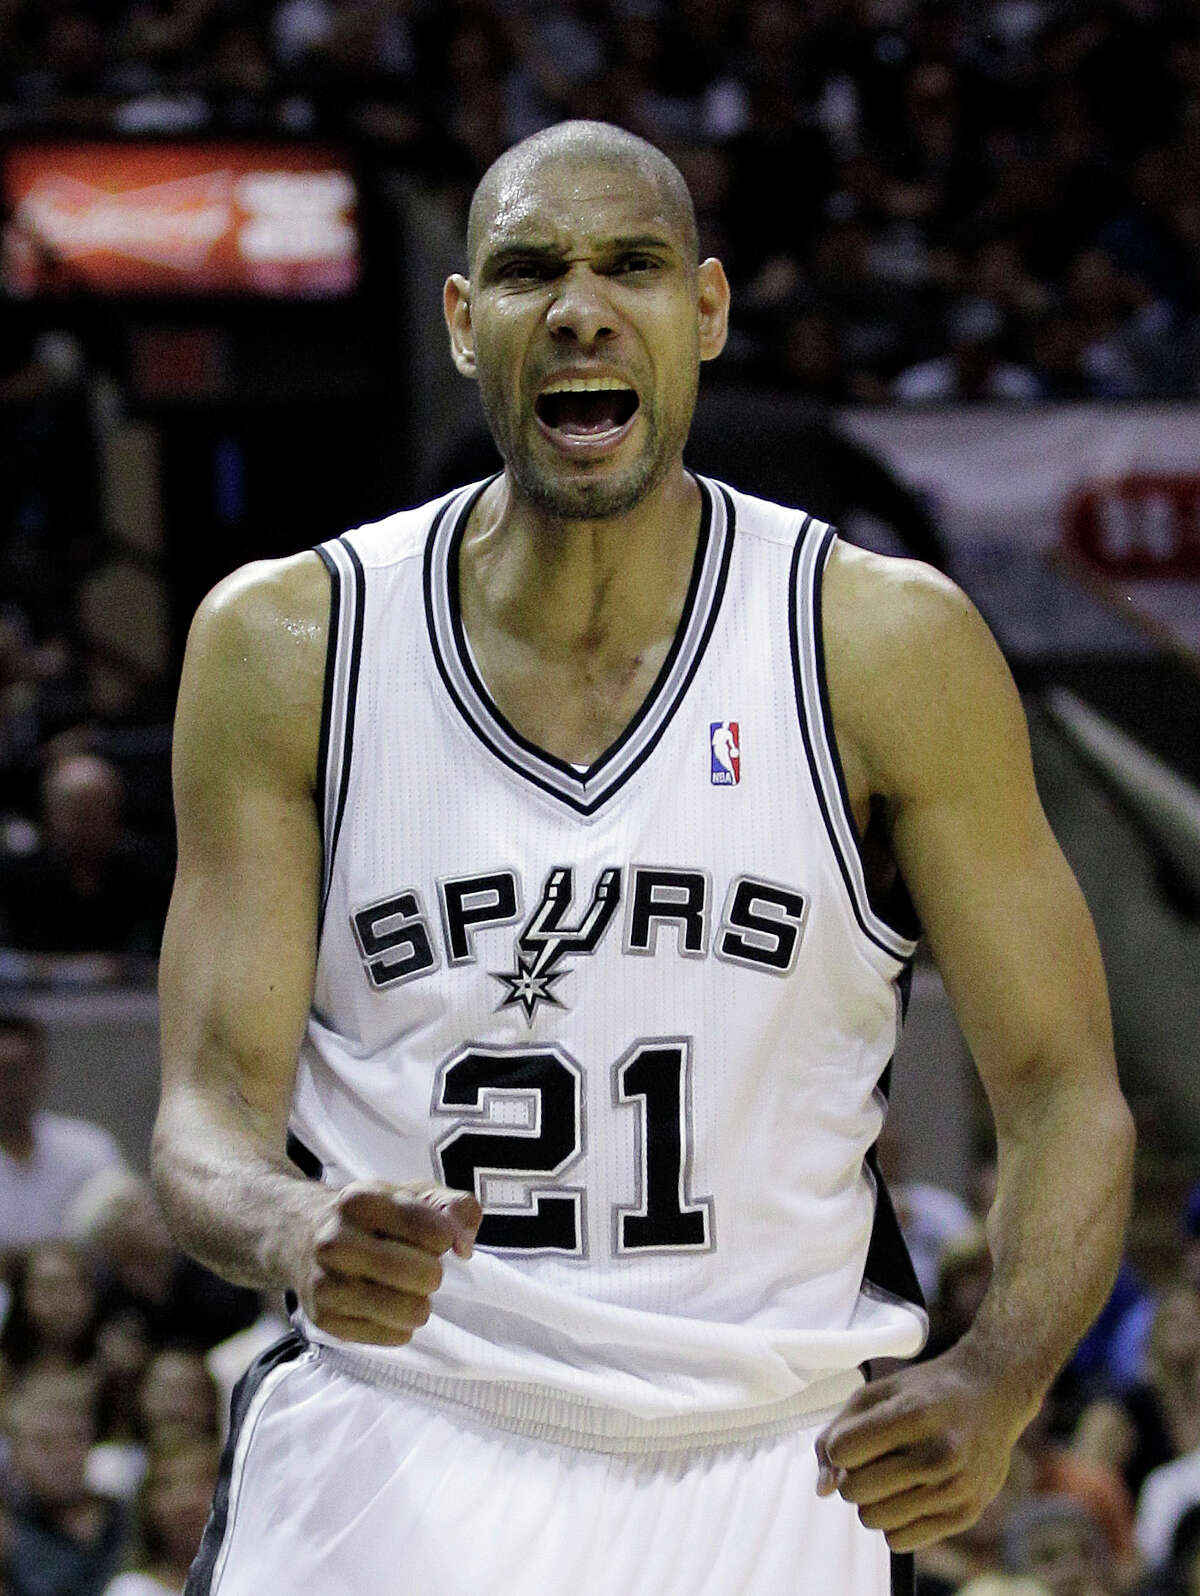 San Antonio Spurs' Tim Duncan reacts after a play during the fourth quarter of Game 1 of an NBA basketball Western Conference semifinal playoff series against the Los Angeles Clippers, Tuesday, May 15, 2012, in San Antonio. San Antonio won 108-92. (AP Photo/Eric Gay)